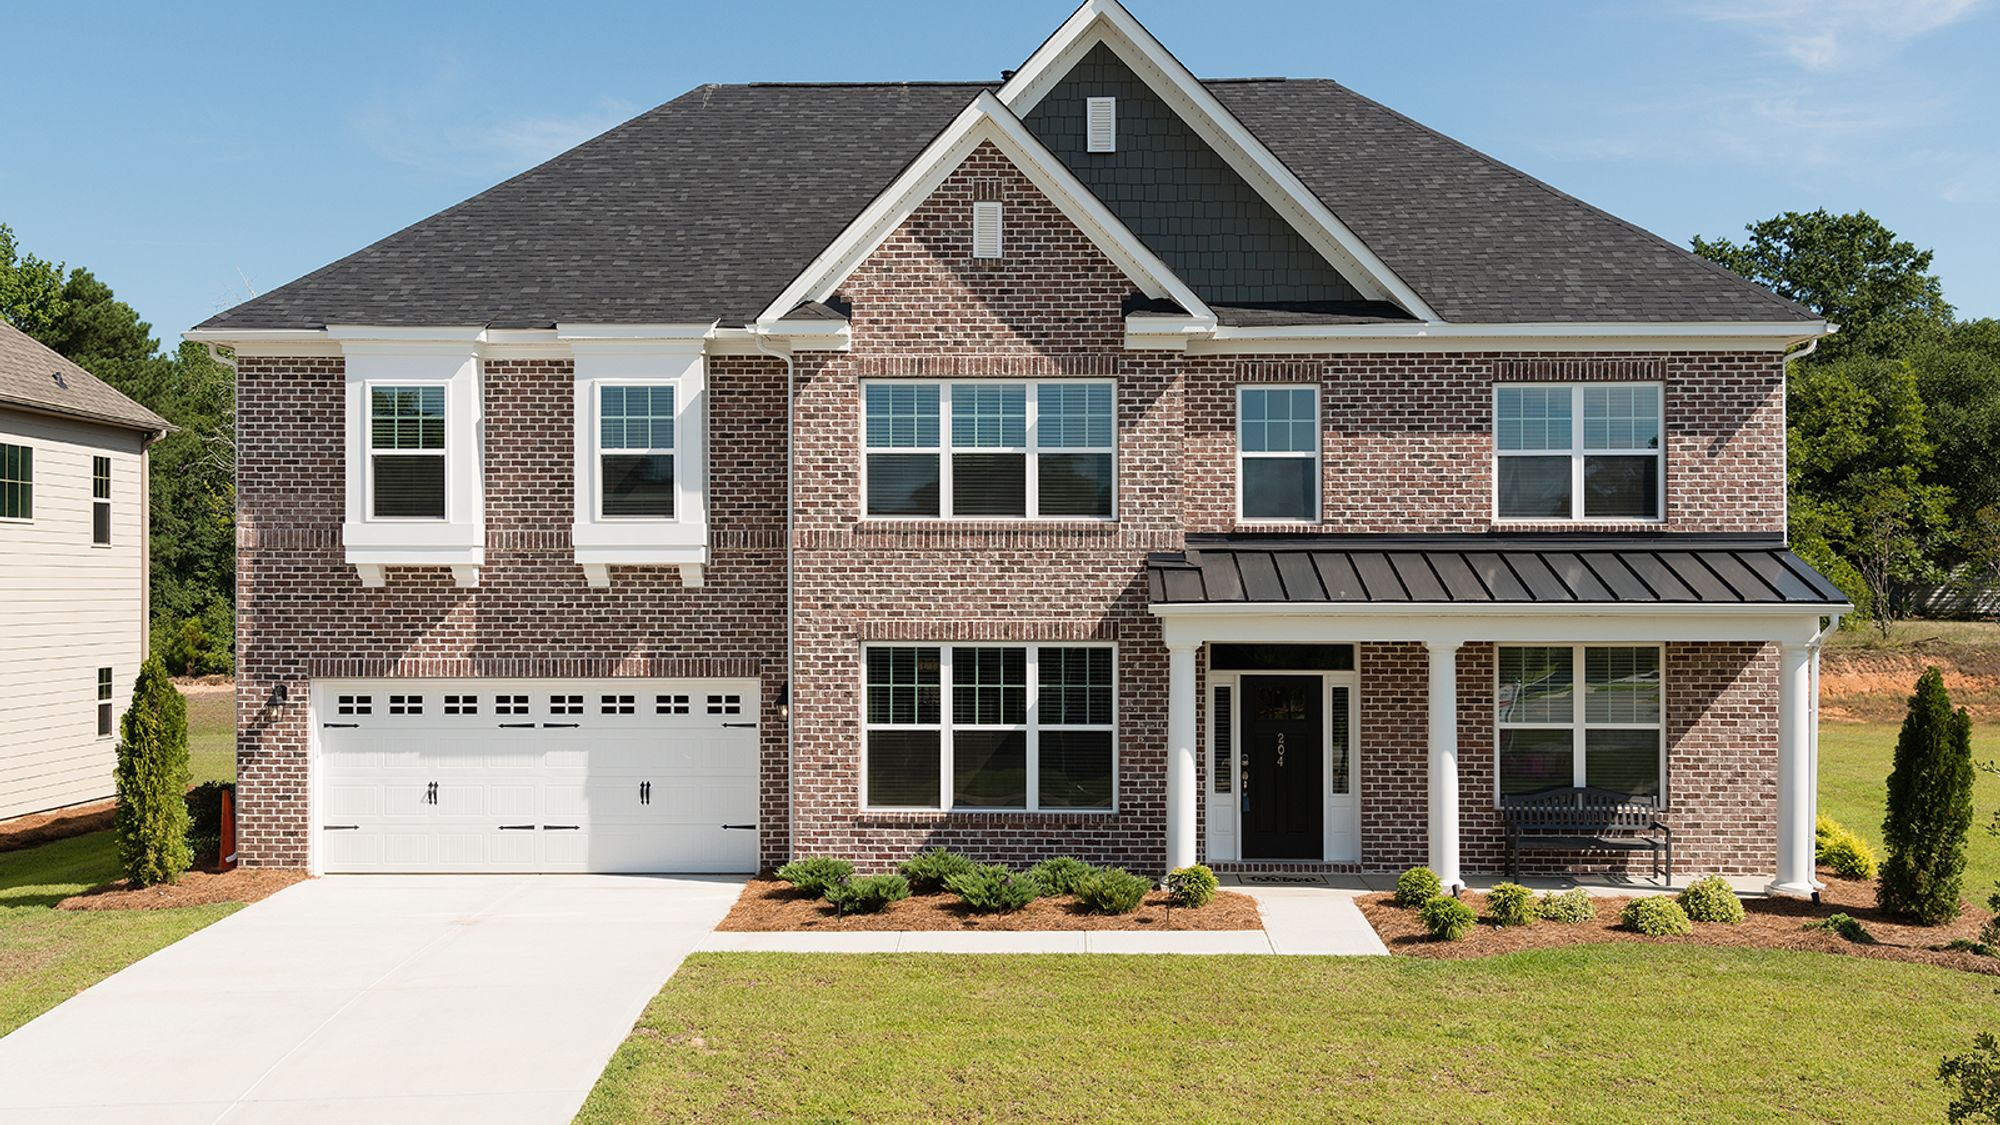 New home for sale in Simpsonville SC featuring Mungo's Patterson Plan